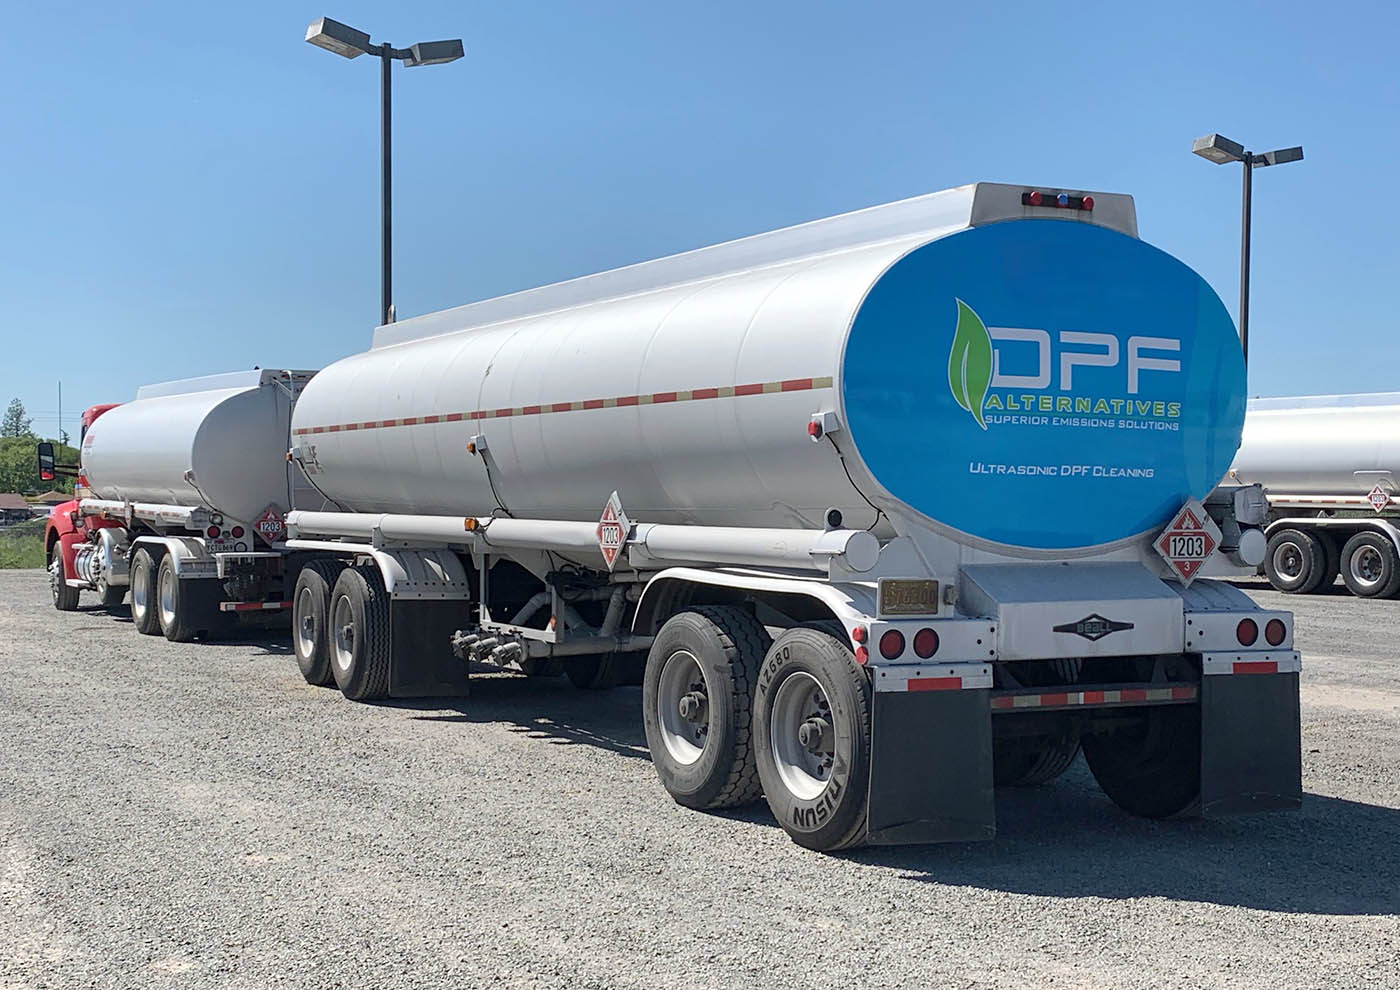 Back of a clean, large, reflective semi truck rig, contact DPF Alternatives for a DPF cleaning in NW Arkansas / Fayetteville.